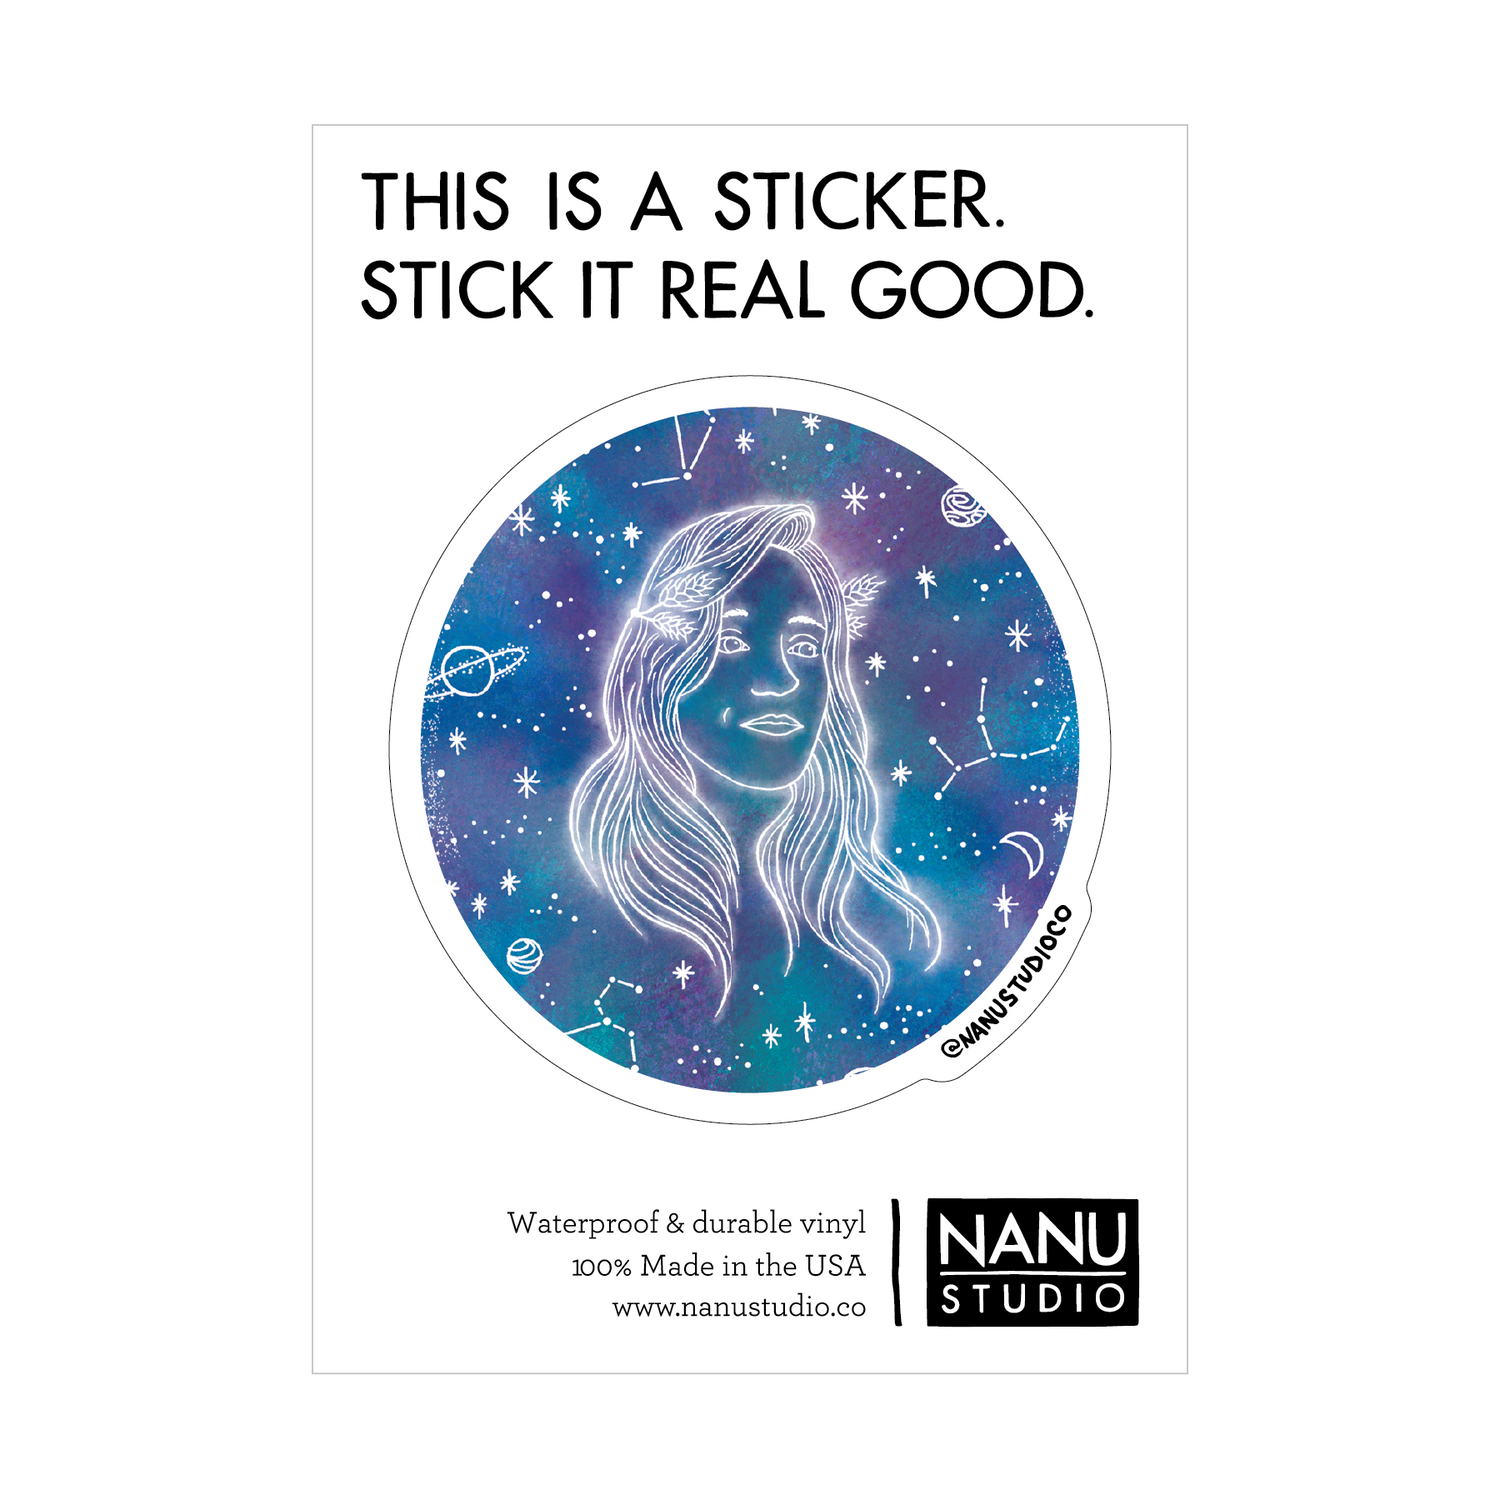 An illustrated sticker featuring a dark blue starlit background with an image of a woman with long hair in the centre which seems as though it's glowing, accompanied by three constellations: Virgo, Leo and Libra